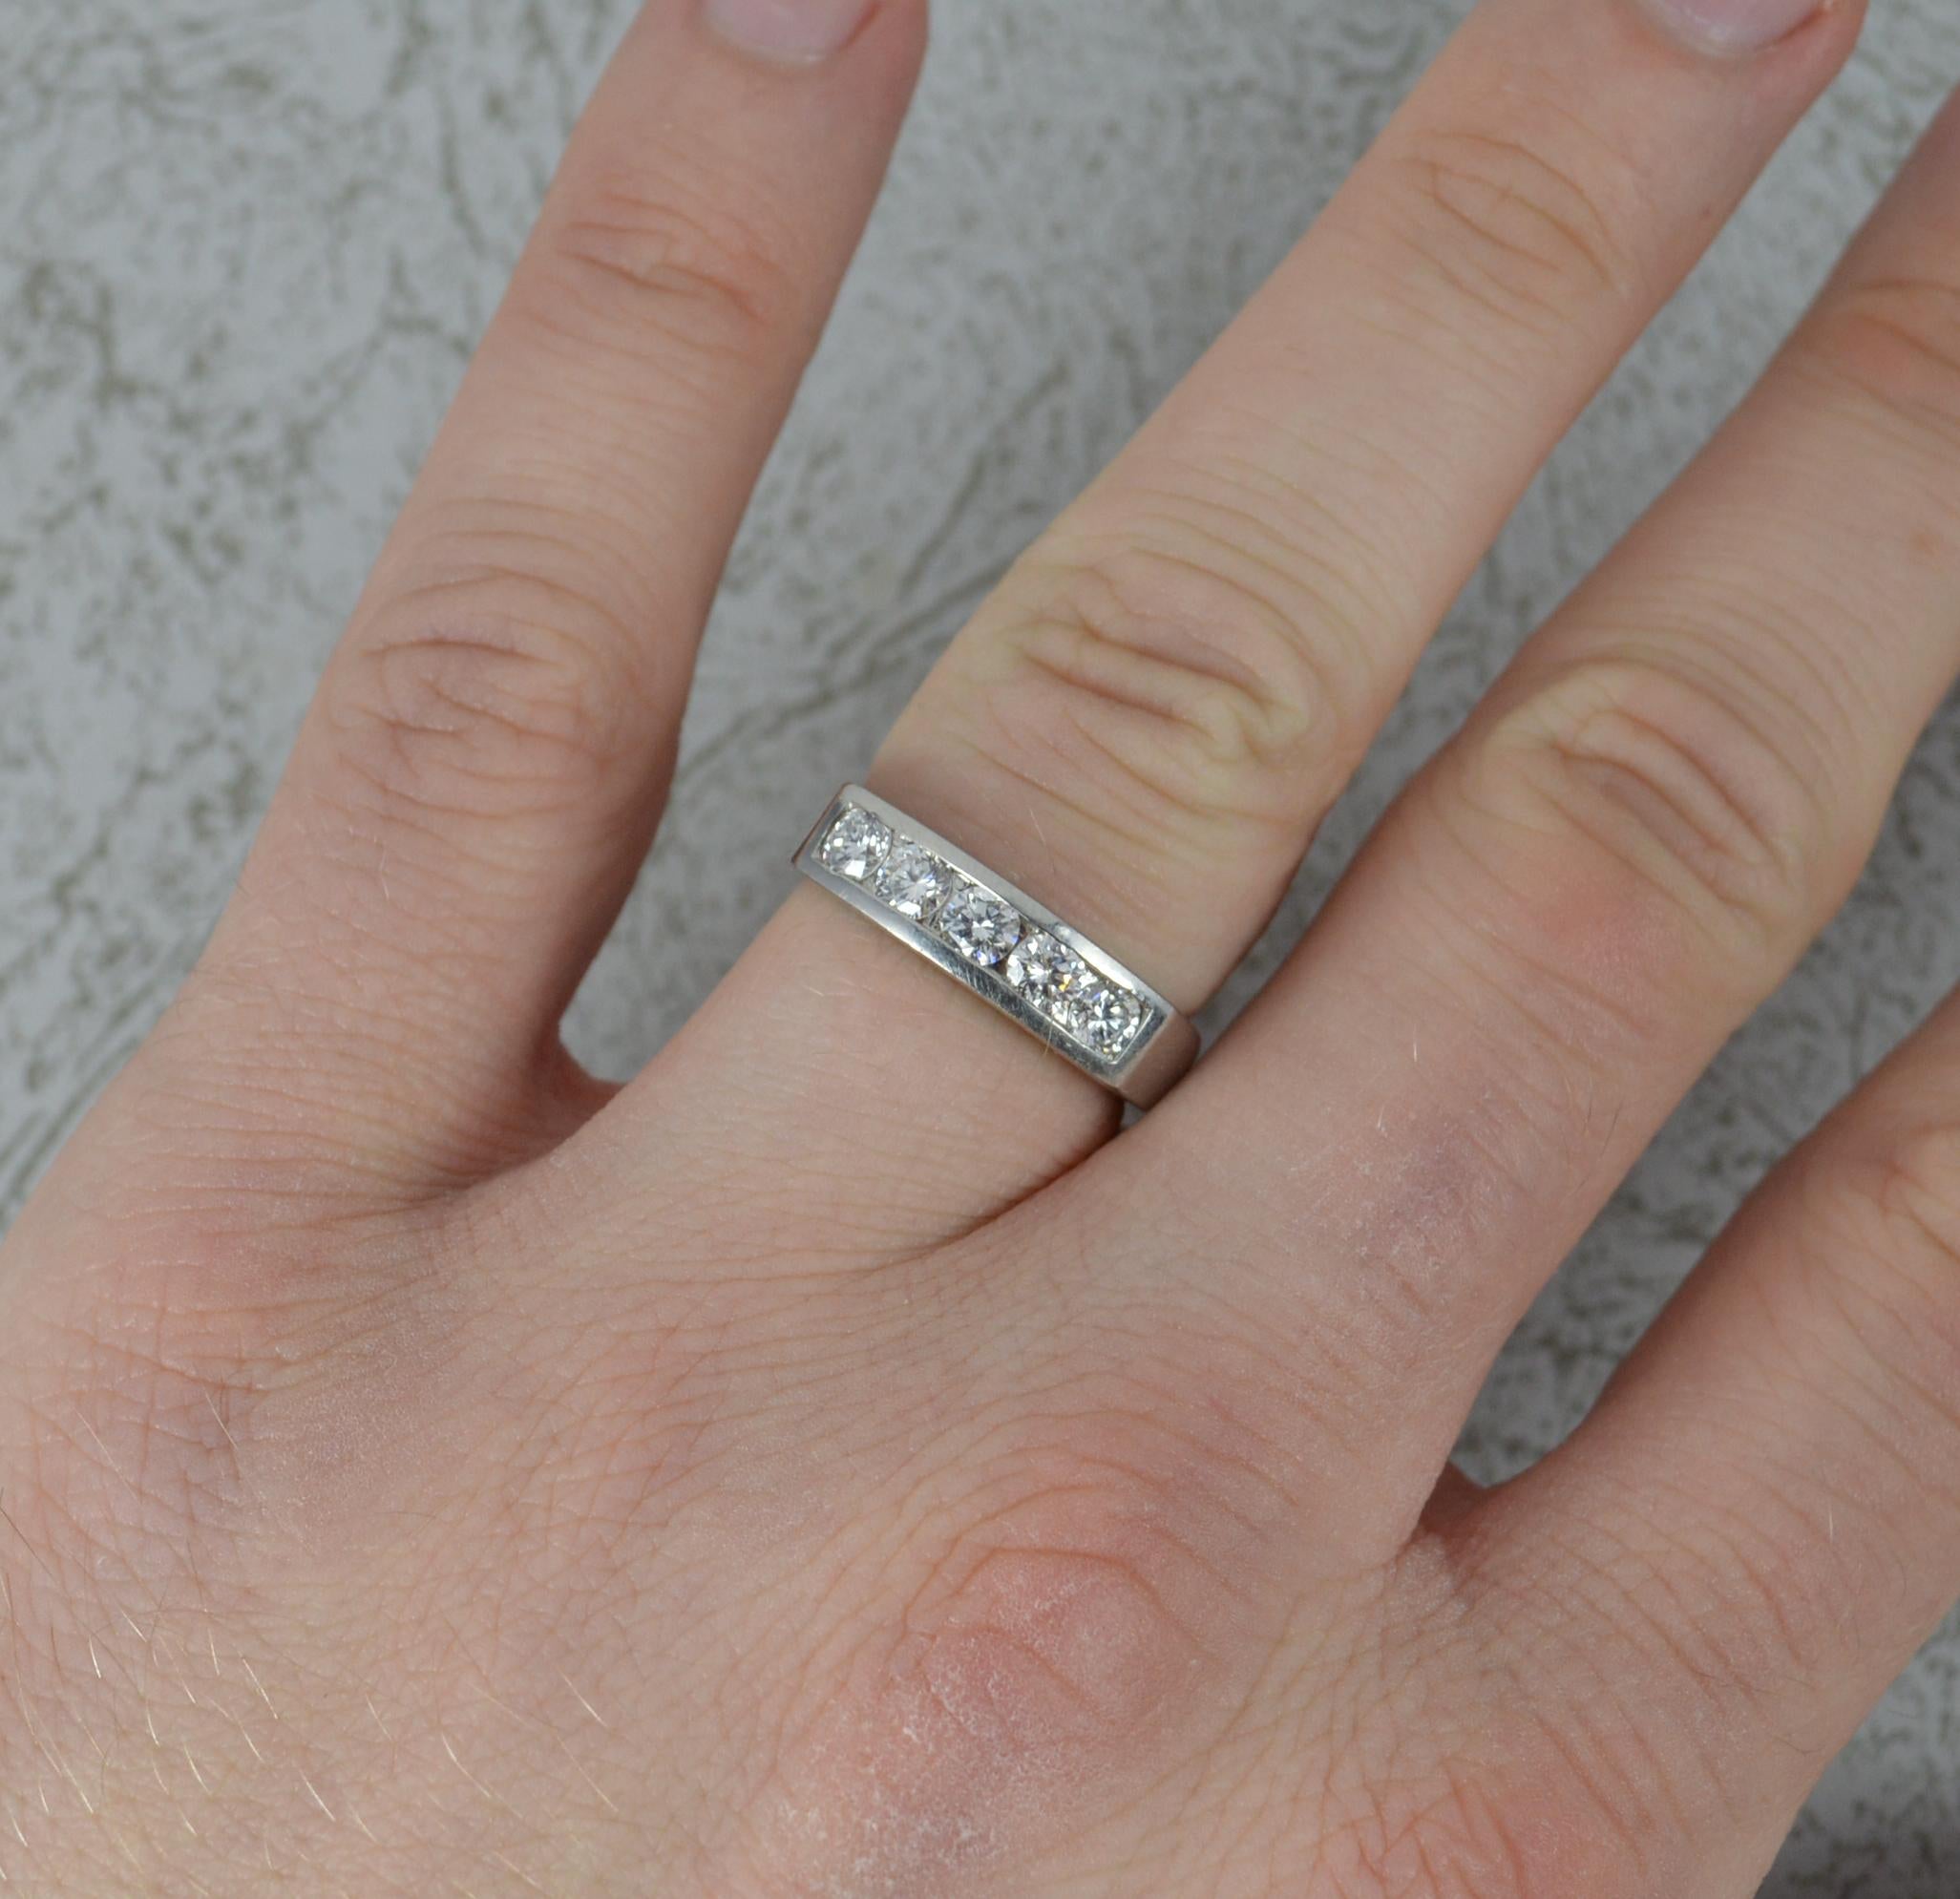 A Platinum and Diamond five stone design stack ring.
​Designed with five natural round brilliant cut diamonds in tension style setting. A total weight of 0.75 carats approx. Very clean, white and sparkly natural diamonds.
17mm spread of stones,